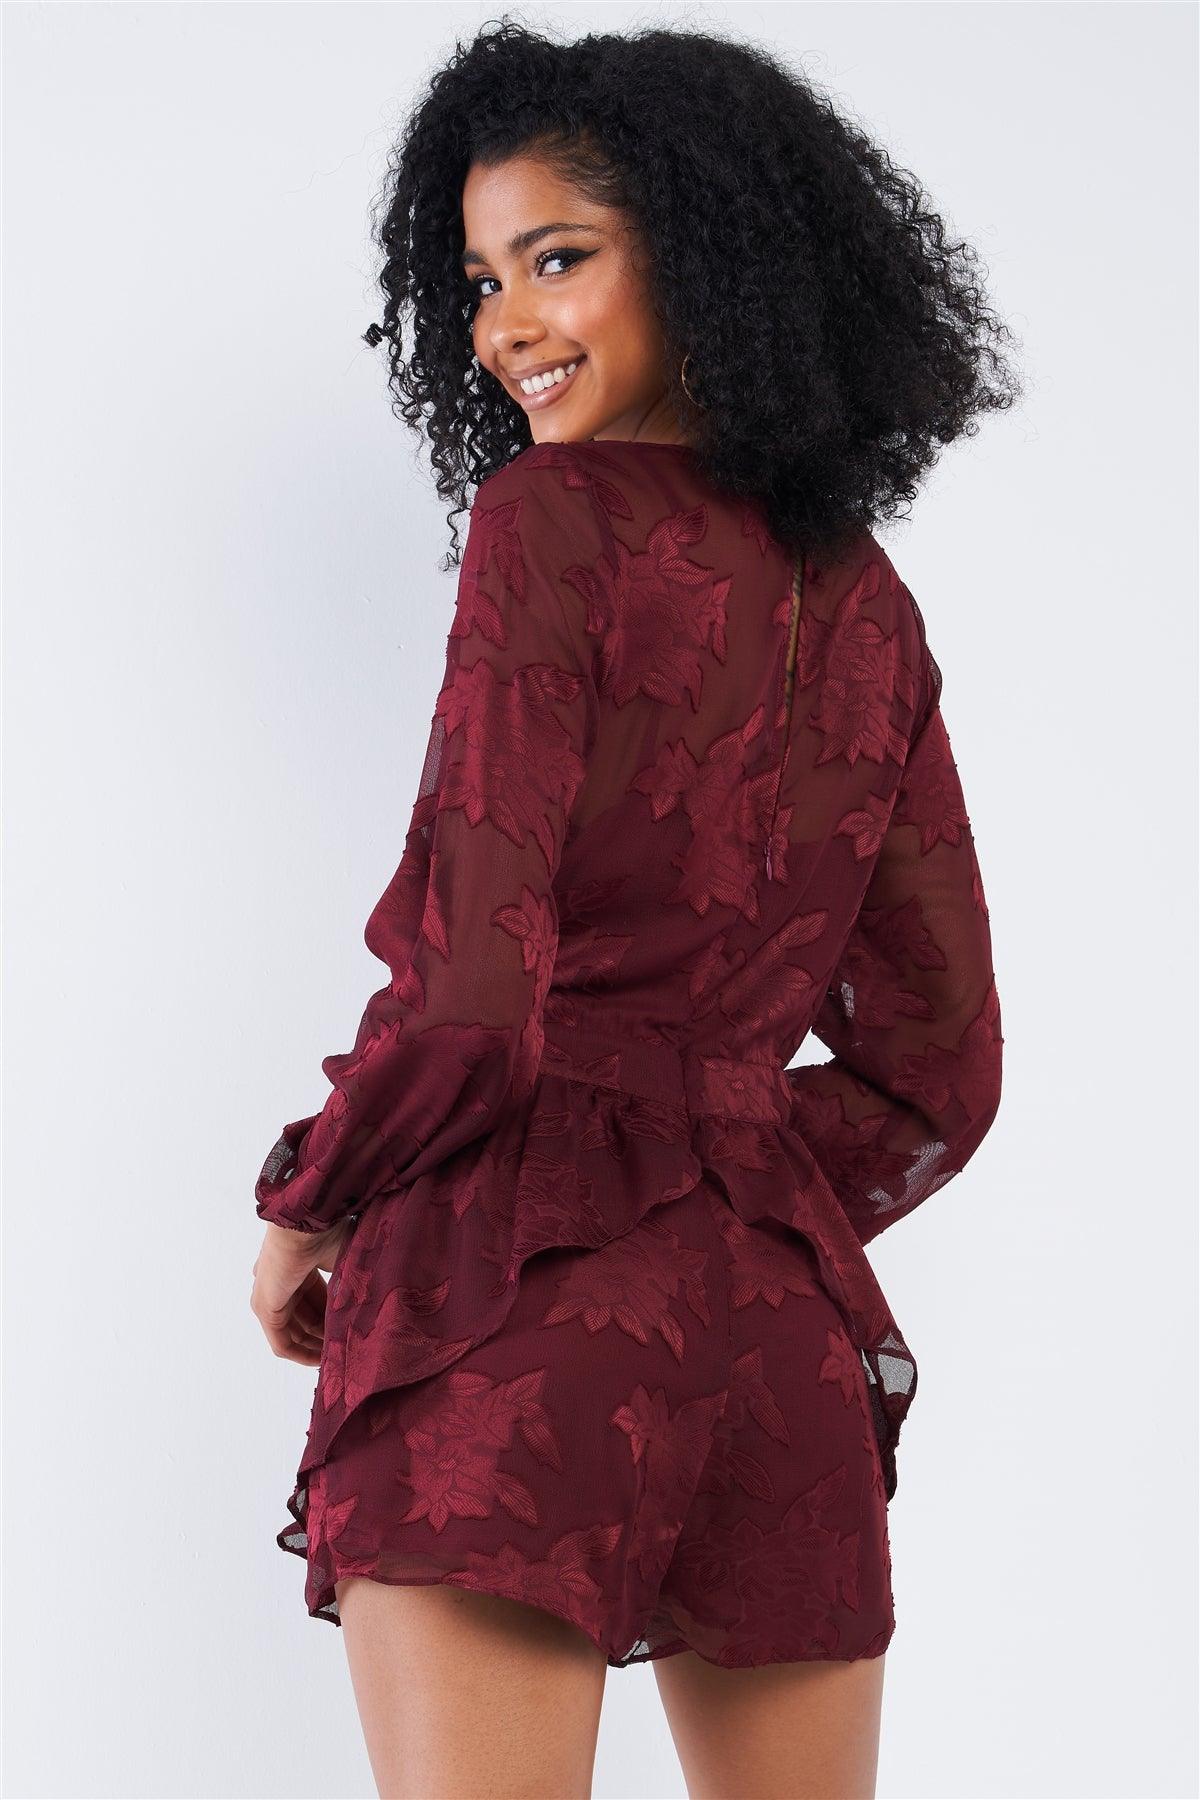 Cabernet Red Long Sleeve Layered Lace V-neck Button Up Romper